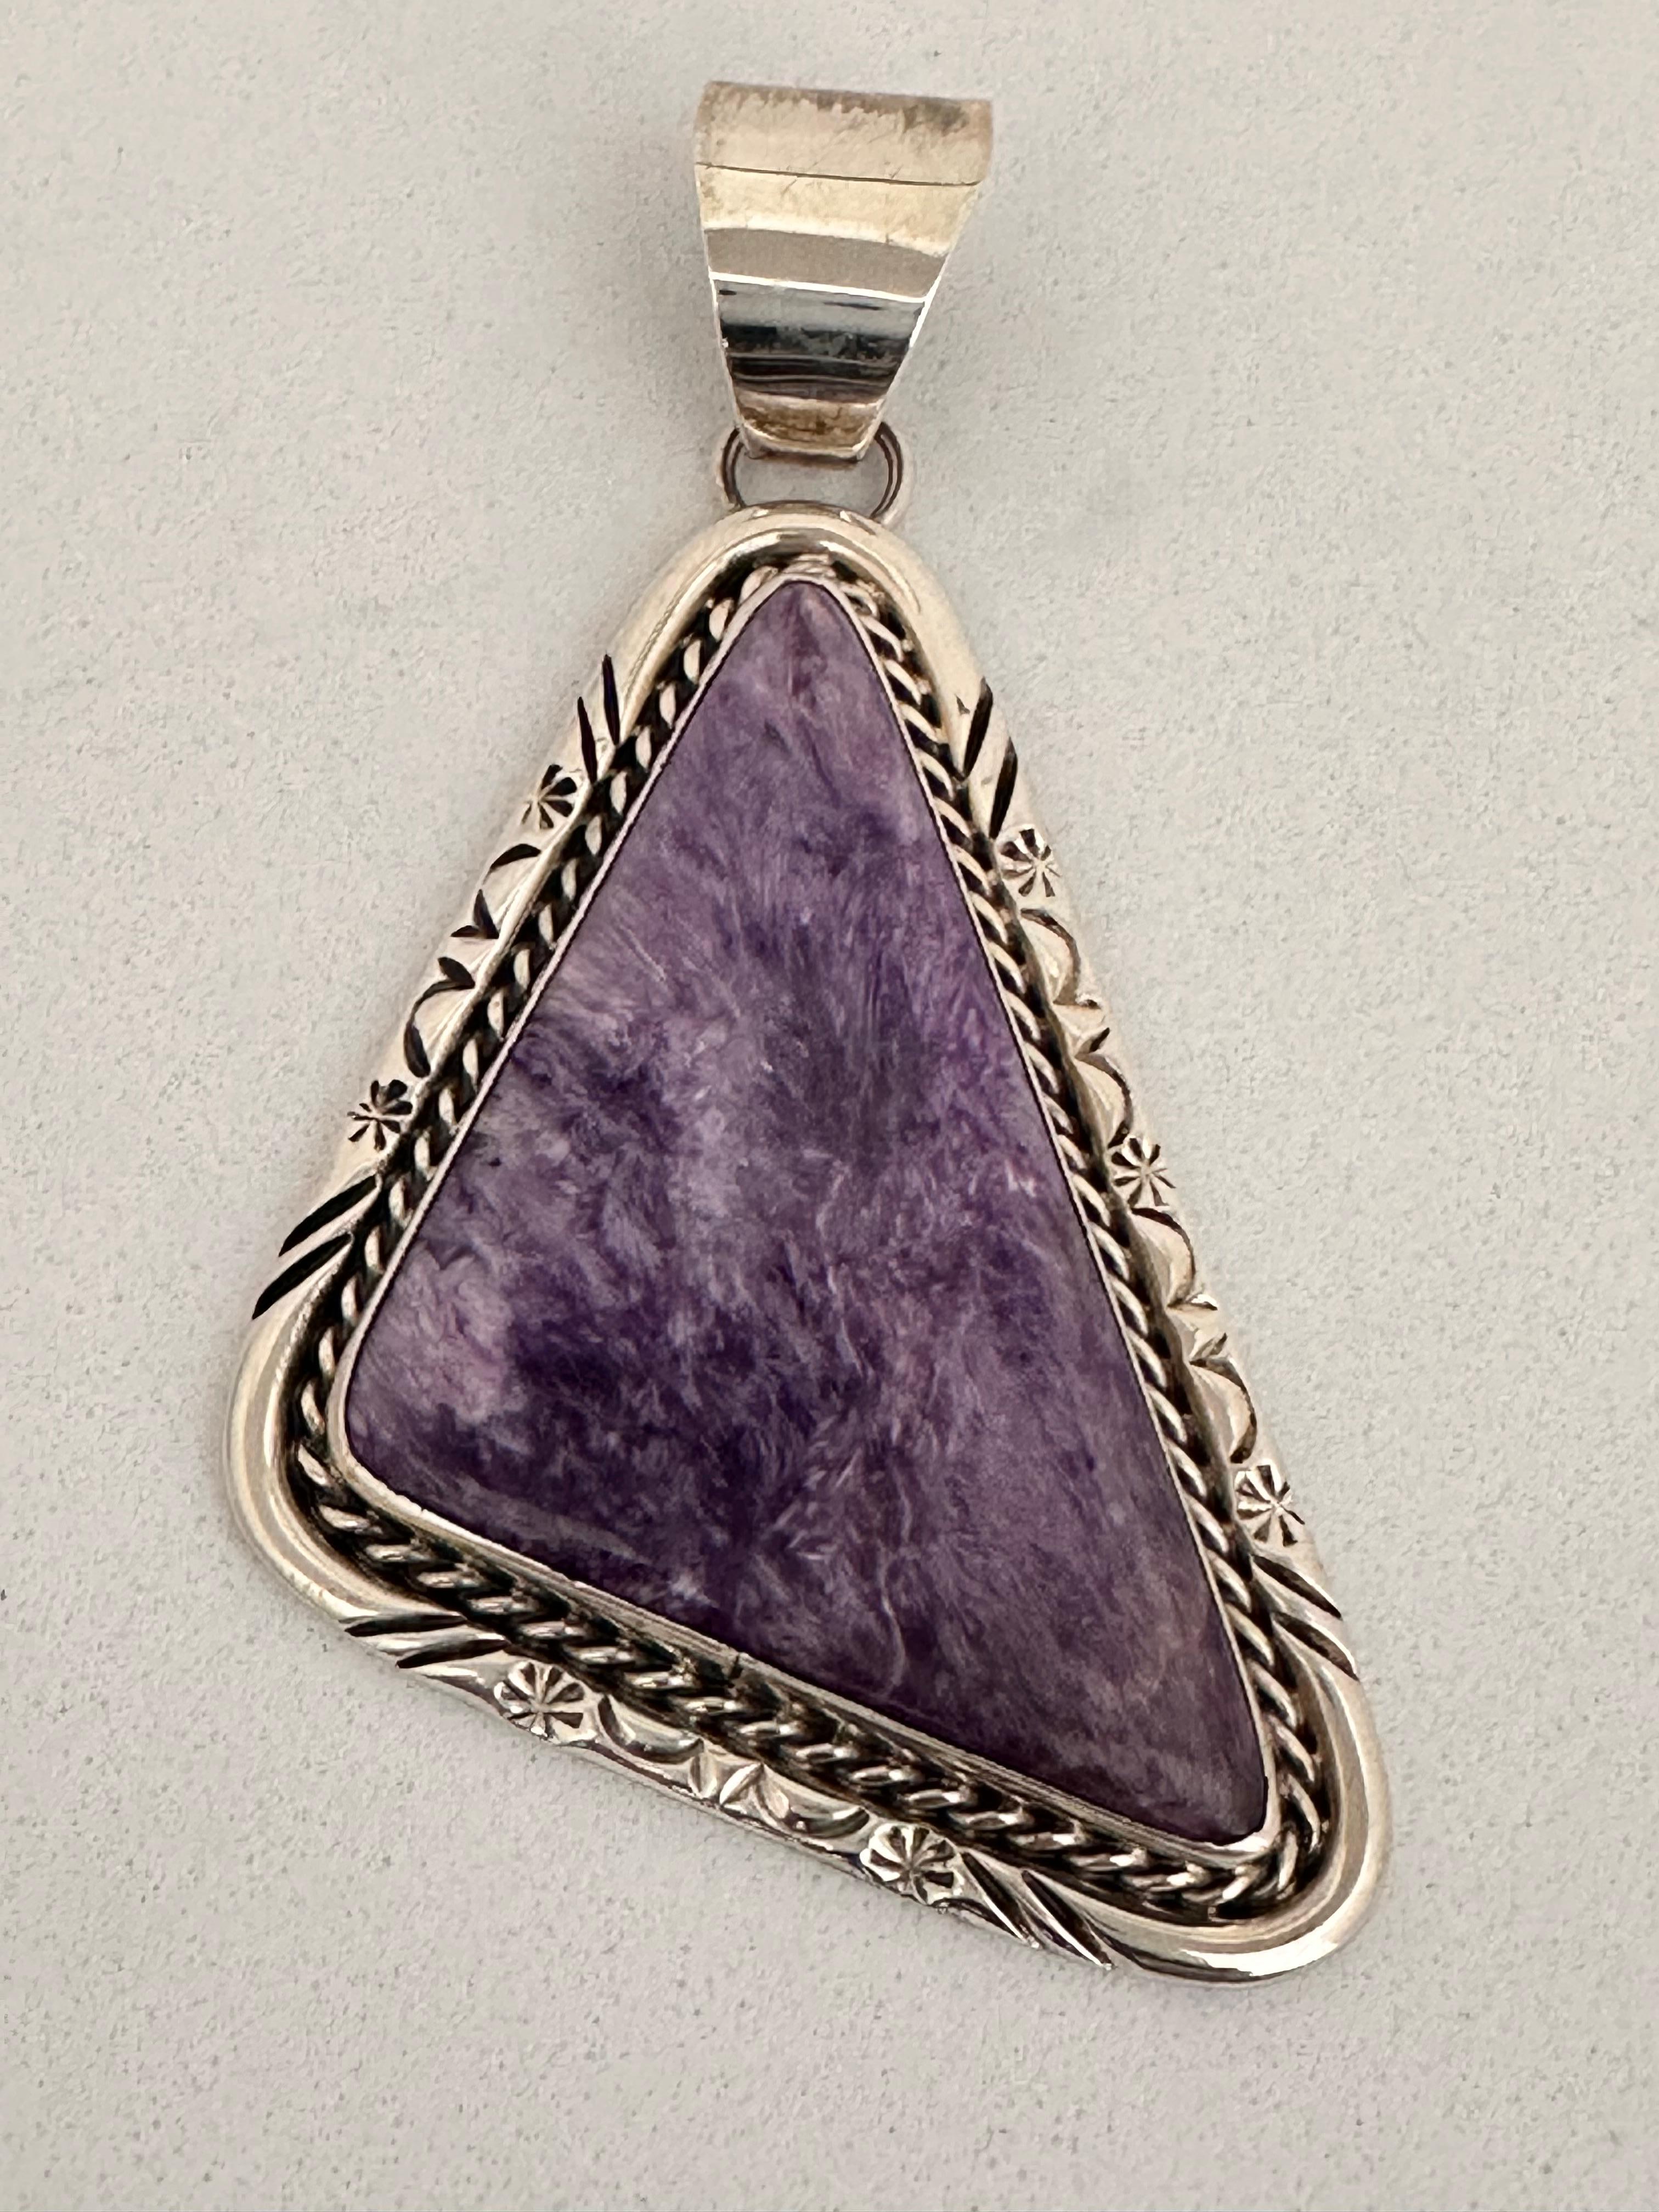 Sterling Silver .925 Charoite Pendant Signed Bill Mex Dineh's
Measures approx 1 3/4